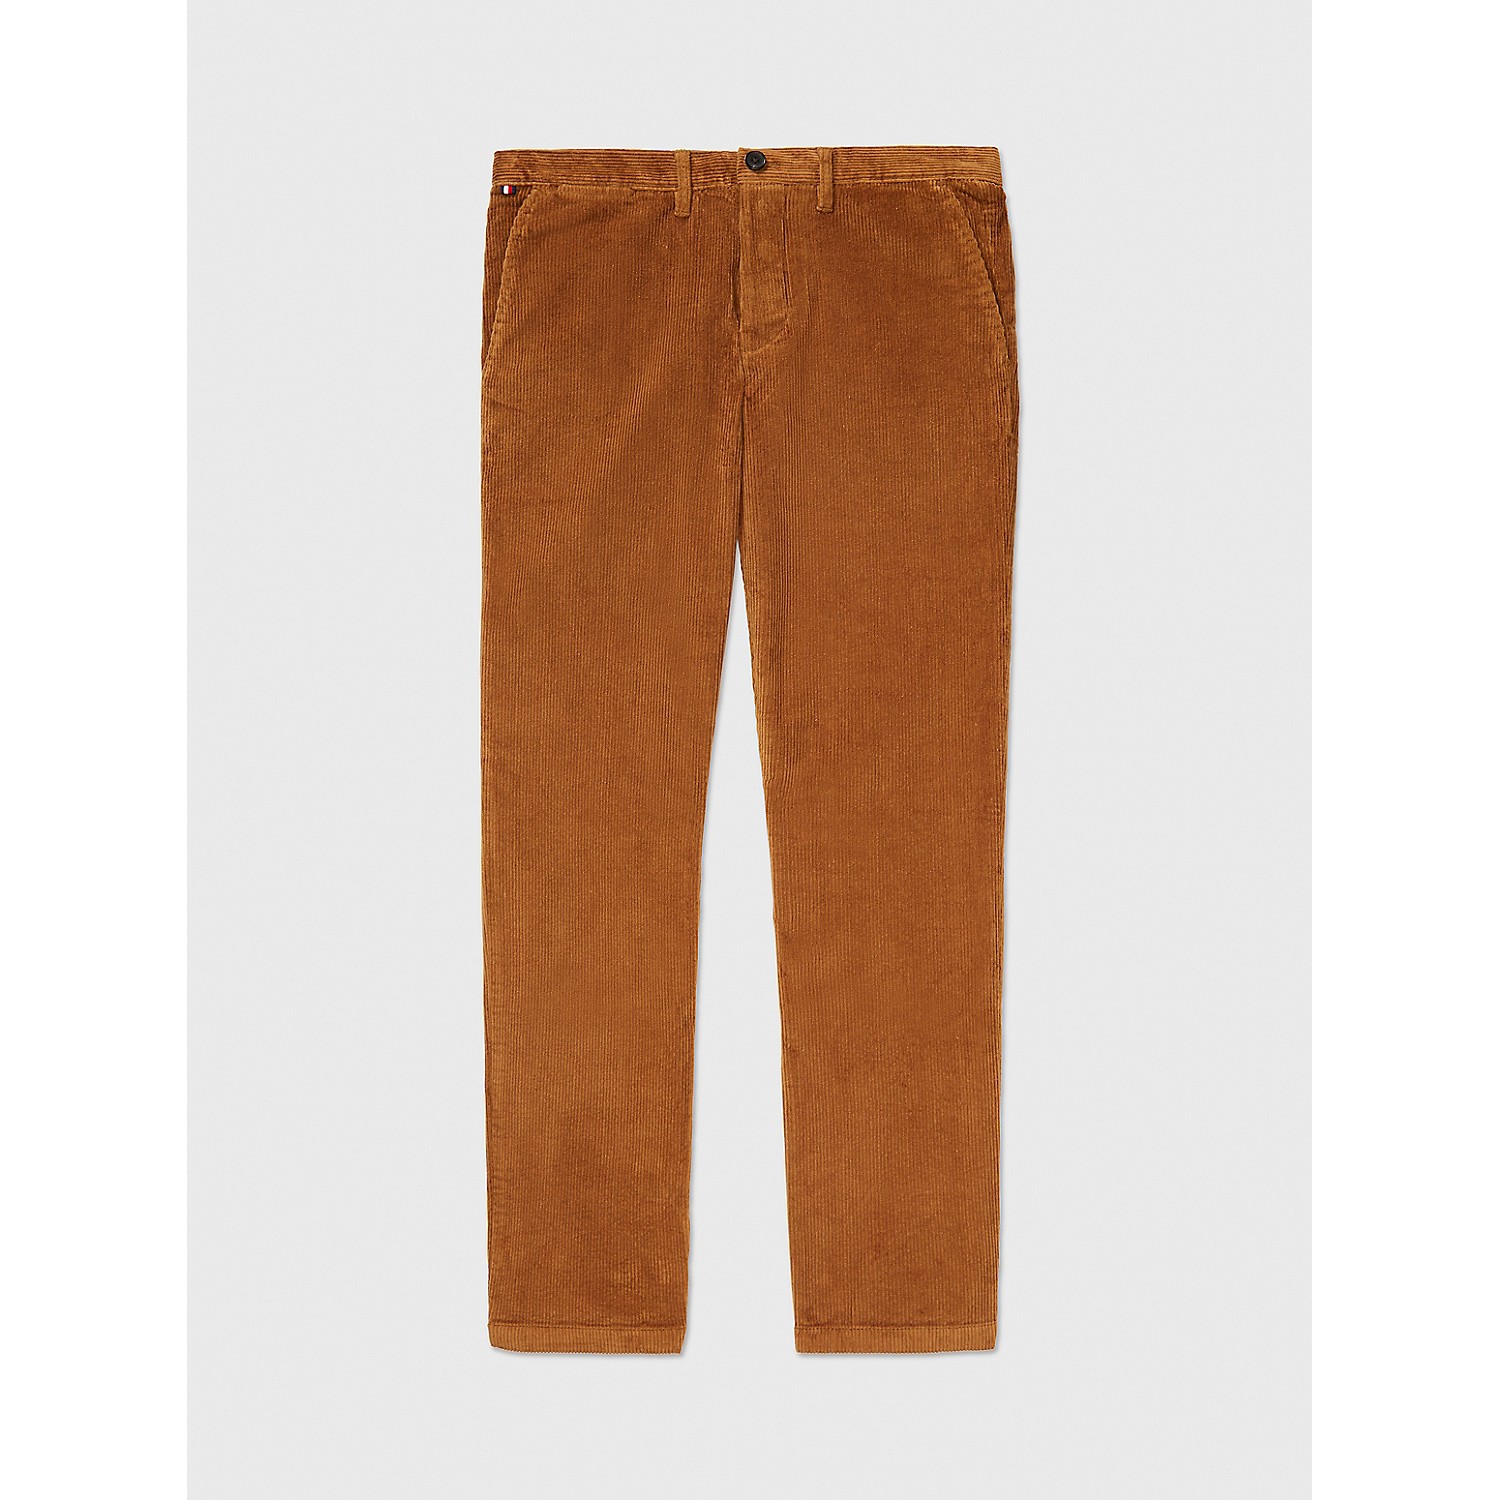 TOMMY HILFIGER Straight Fit Corduroy Chino